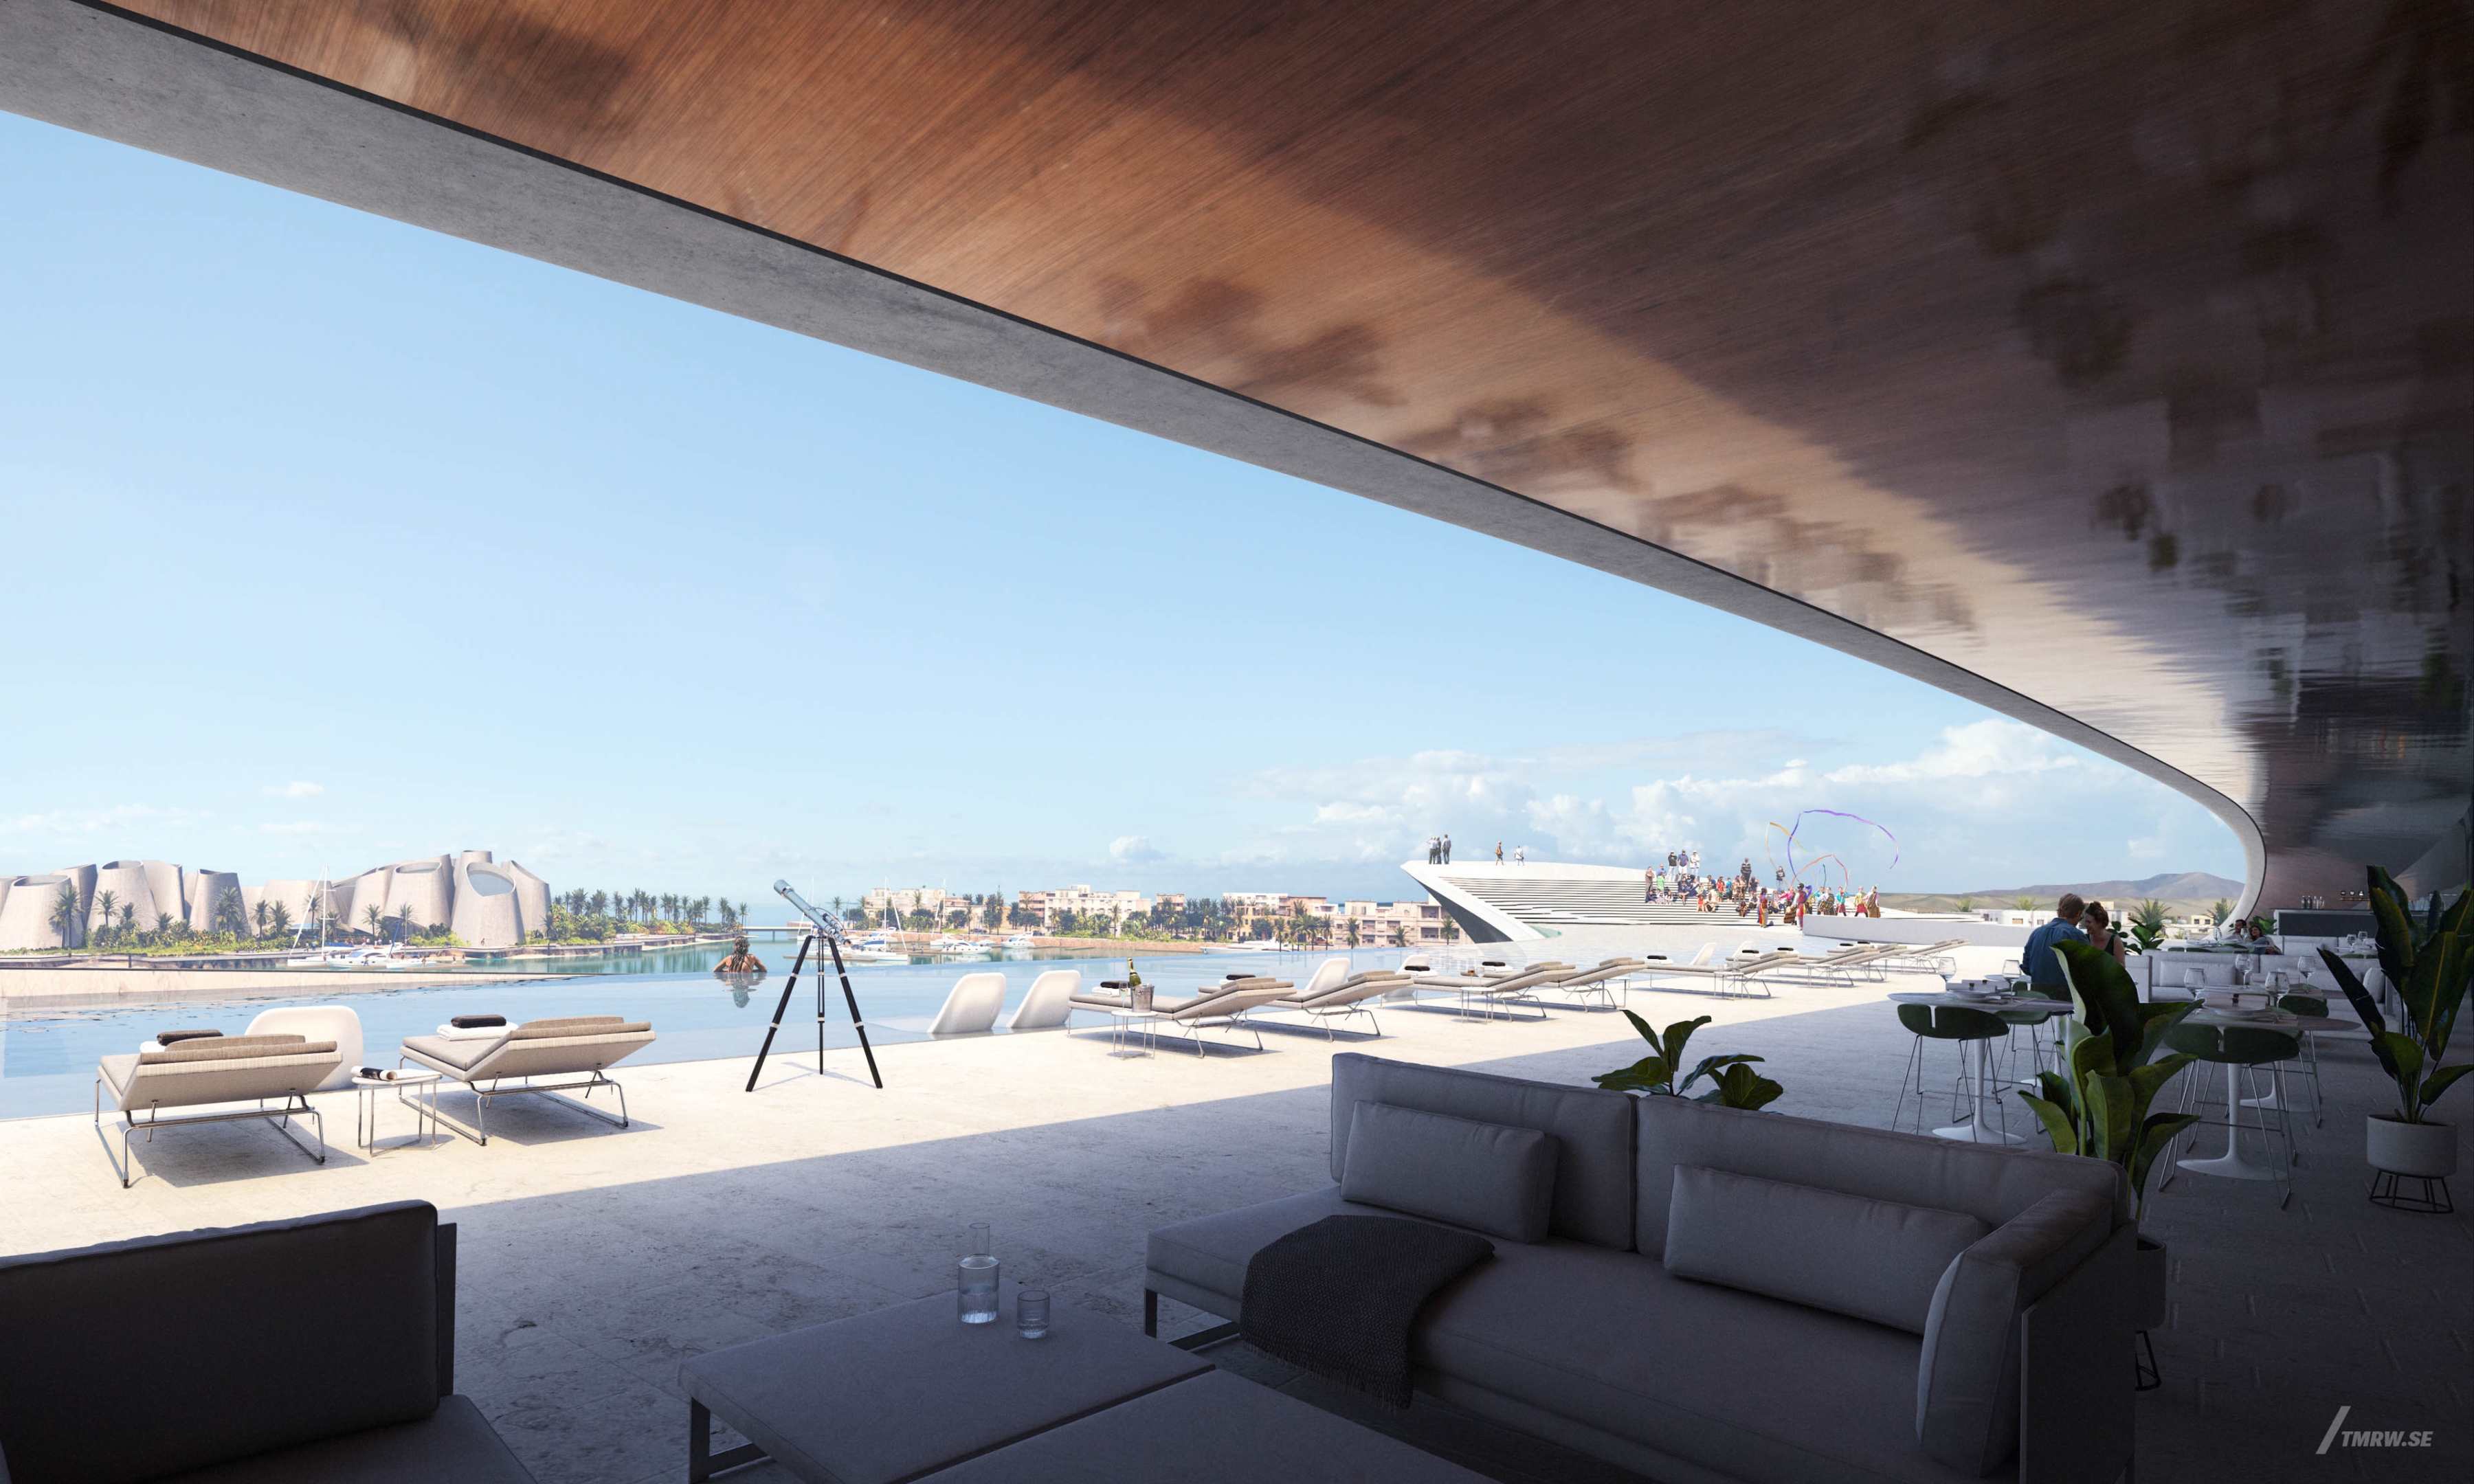 Architectural visualization of Red Sea Yacht Club for HKS/The Red Sea Developement Company. A image of the interoir of a resturant with seaview in daylight. From ground view.